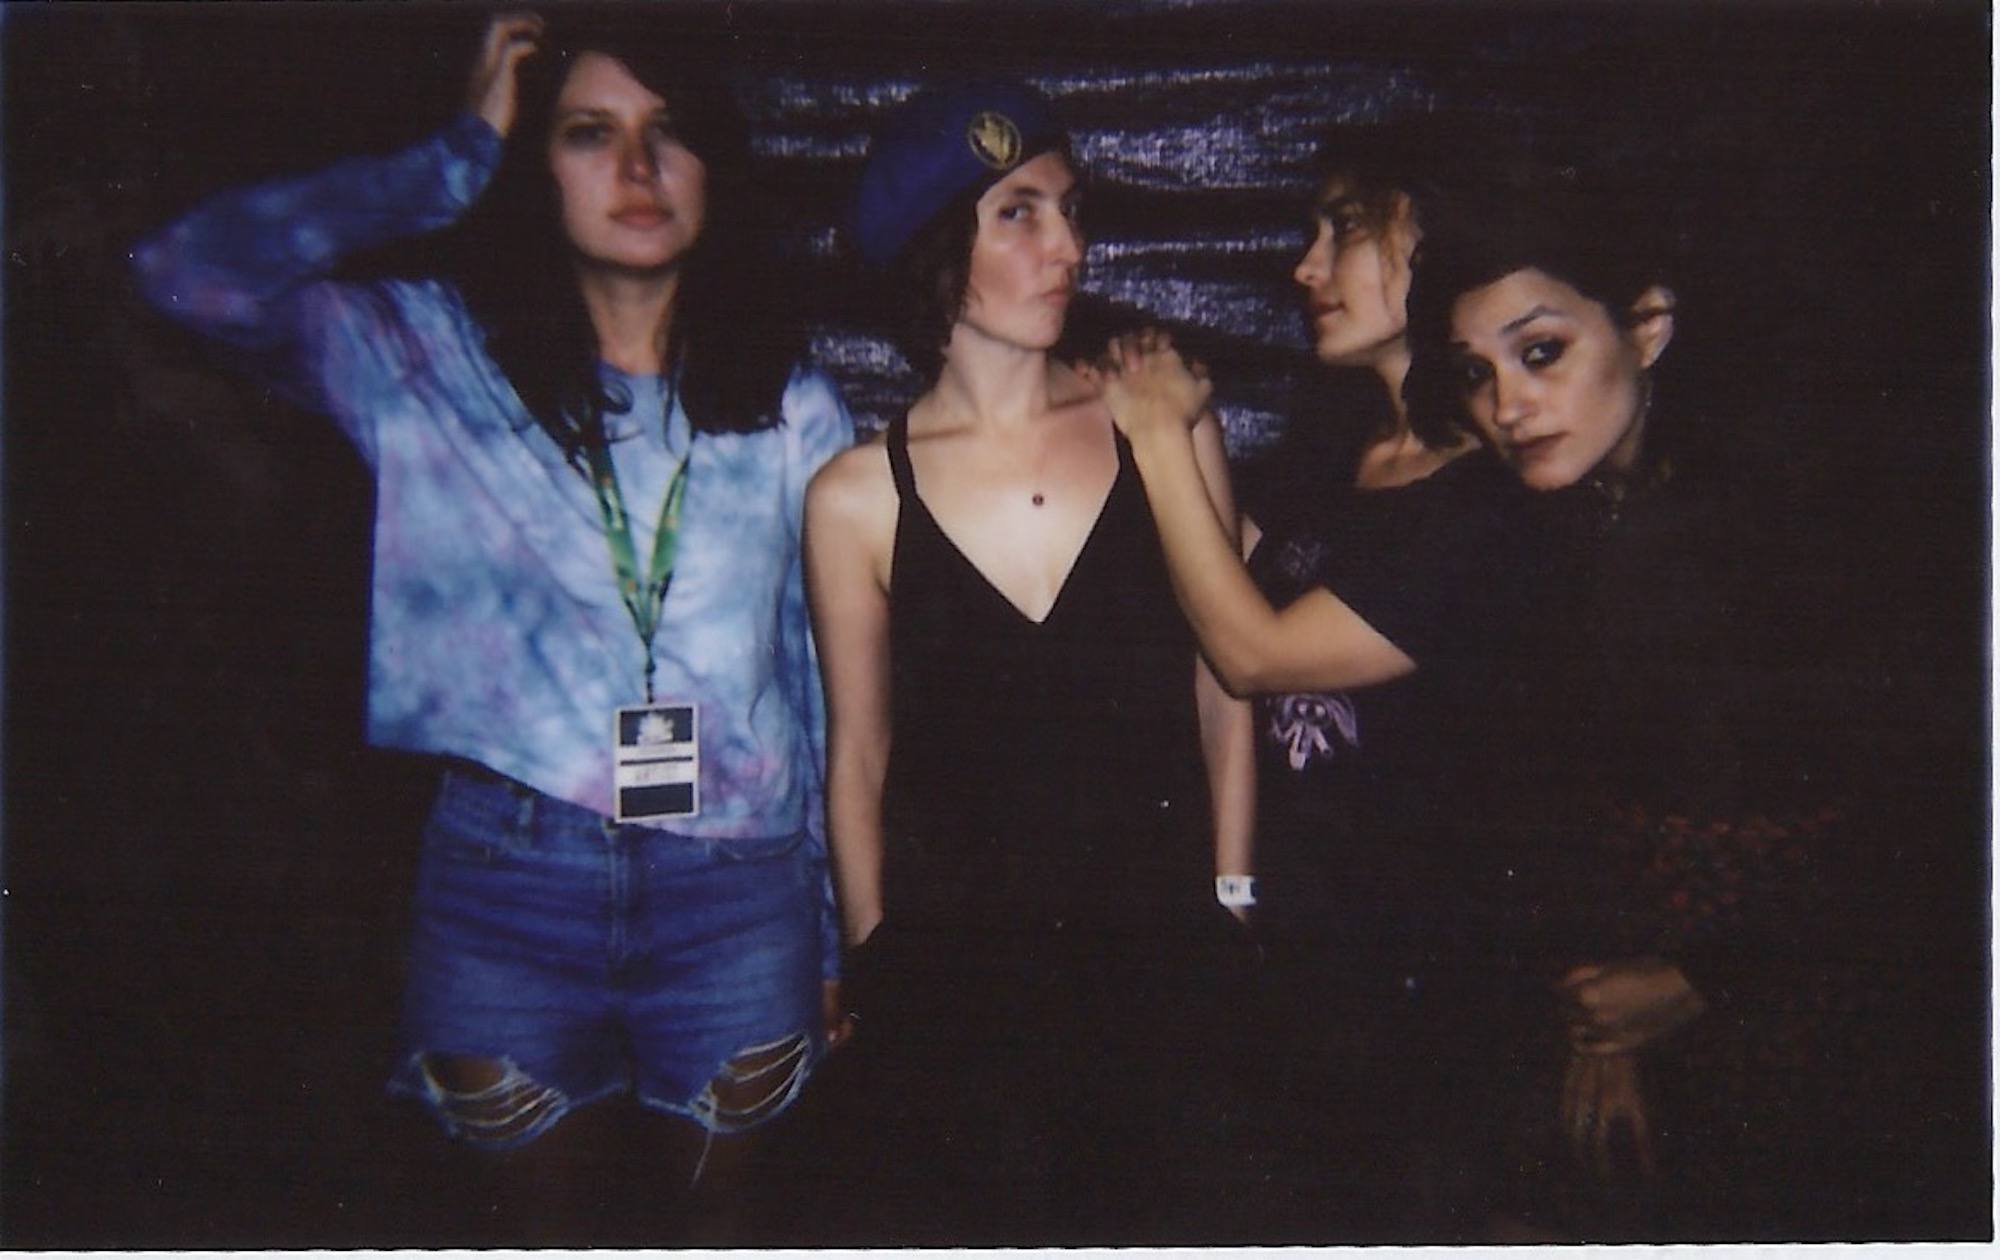 Photo Diary NOS – Warpaint